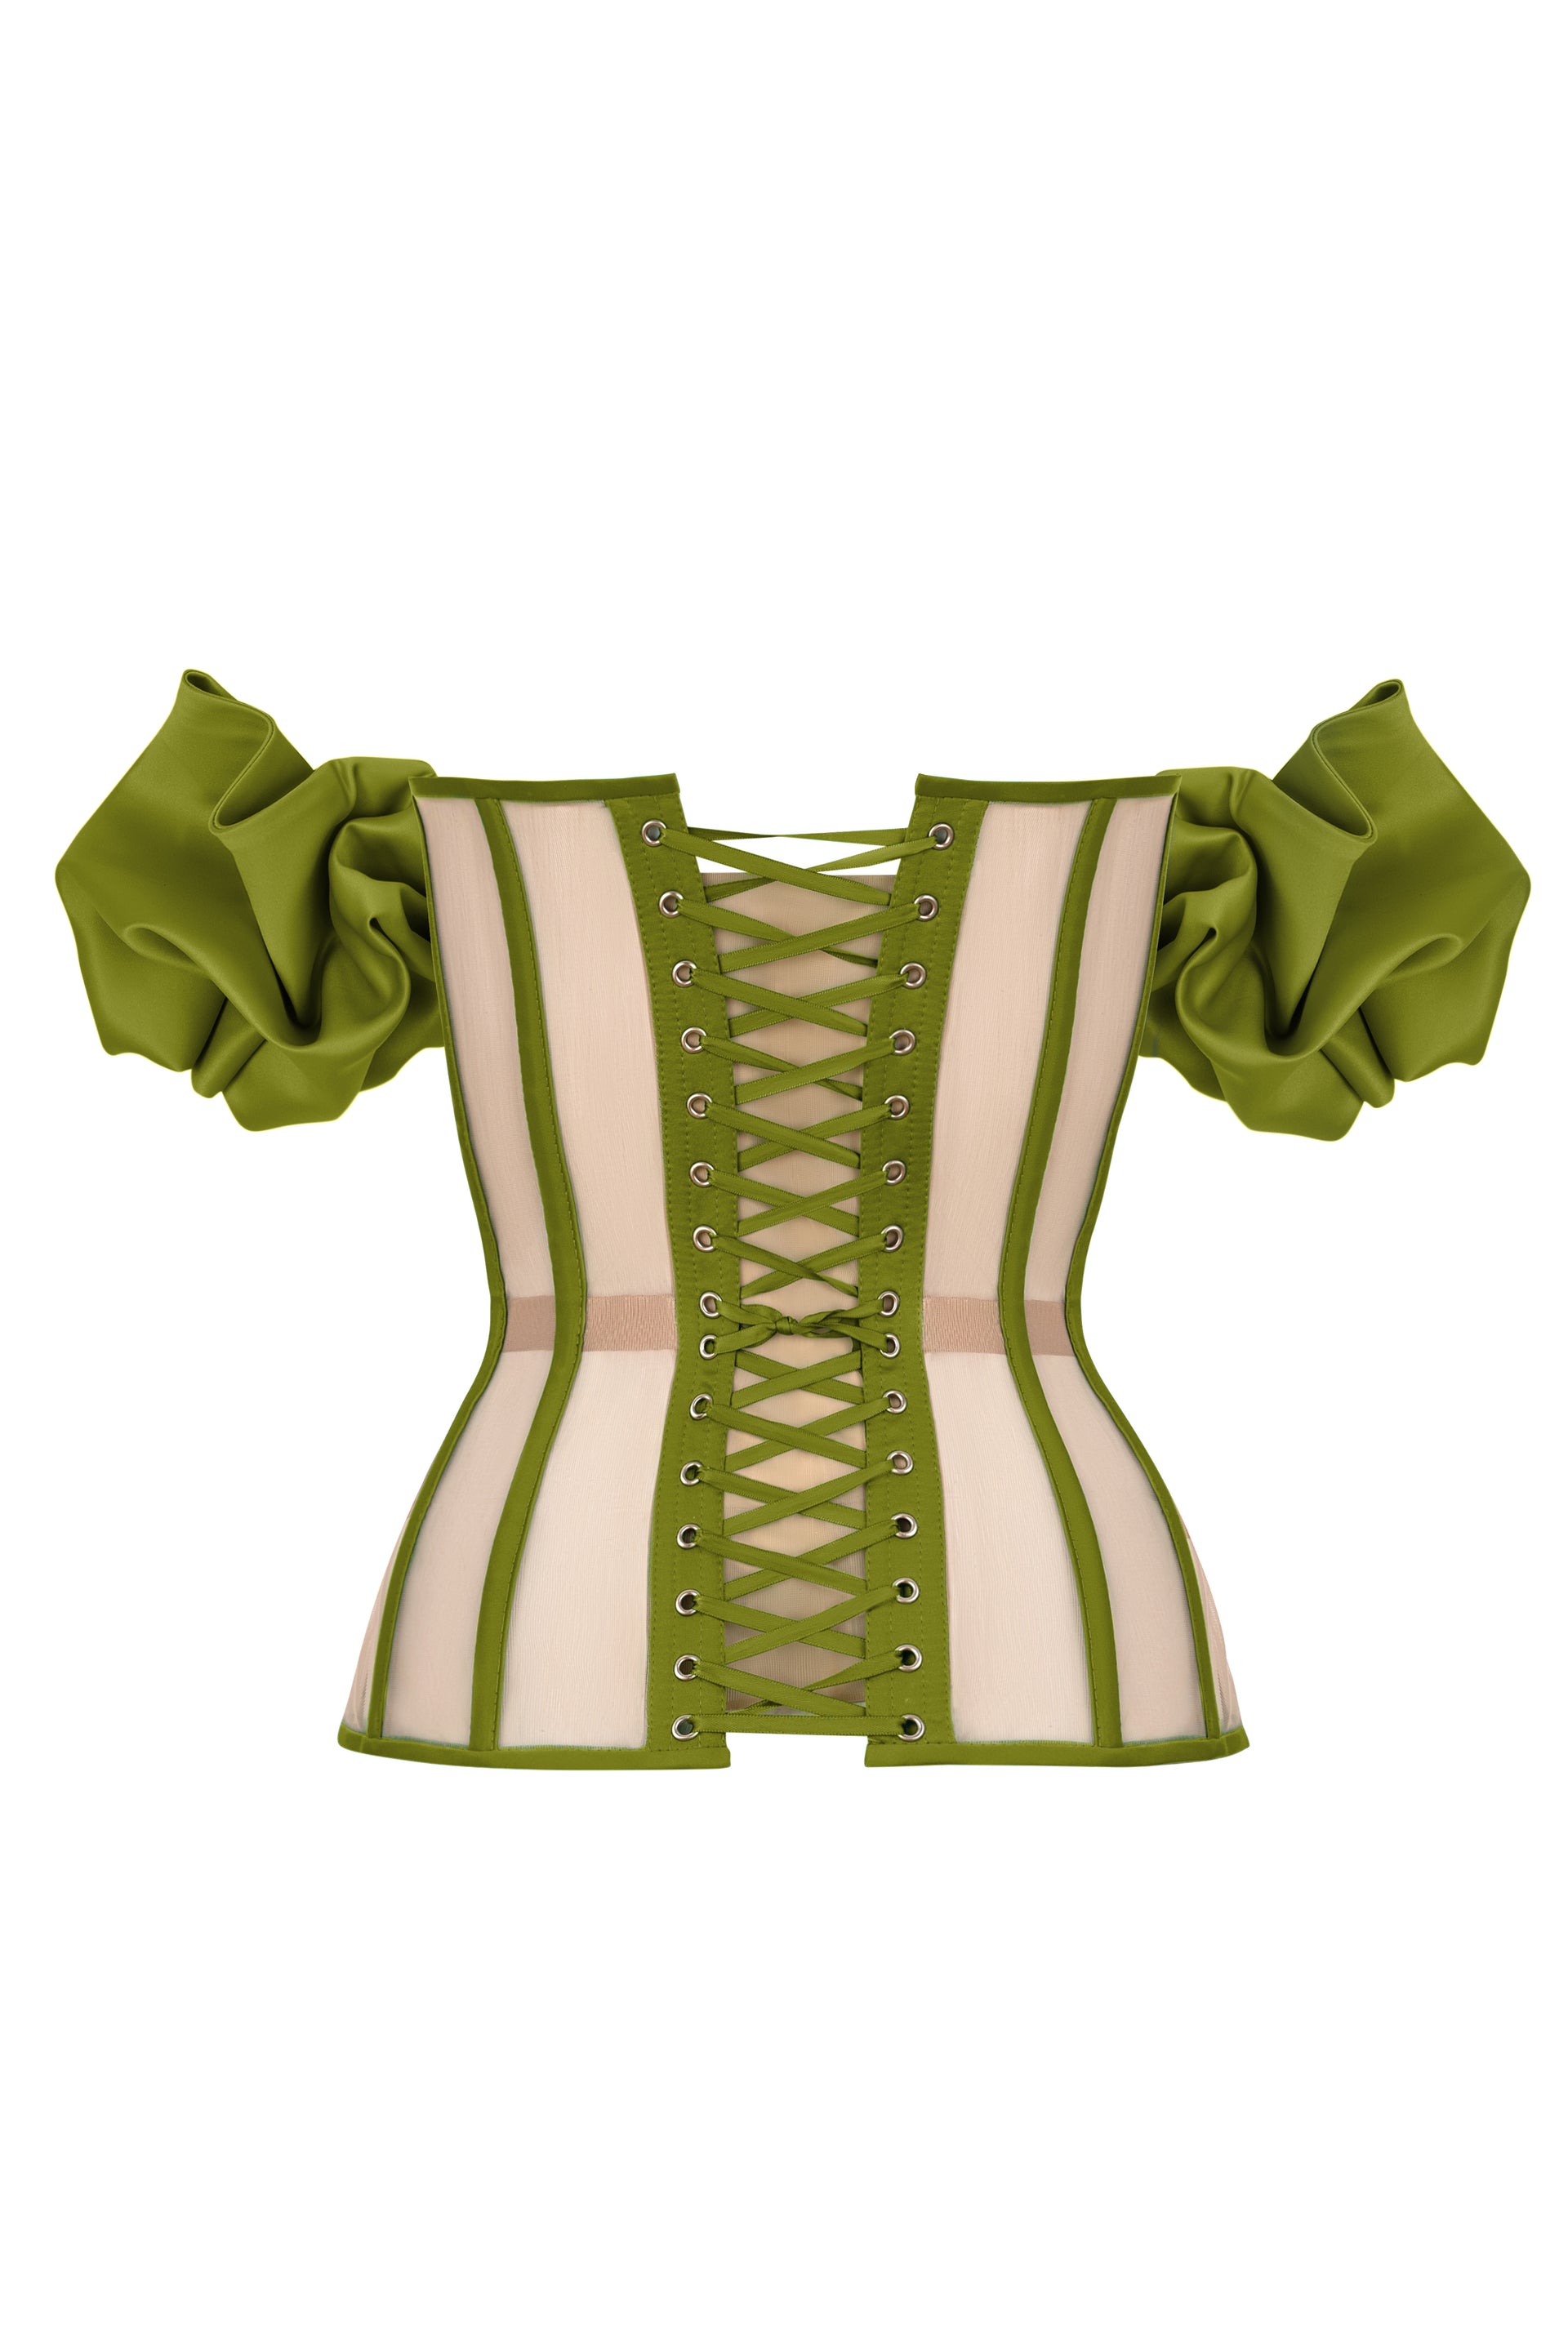 Olive satin corset with transparent back and detachable sleeves